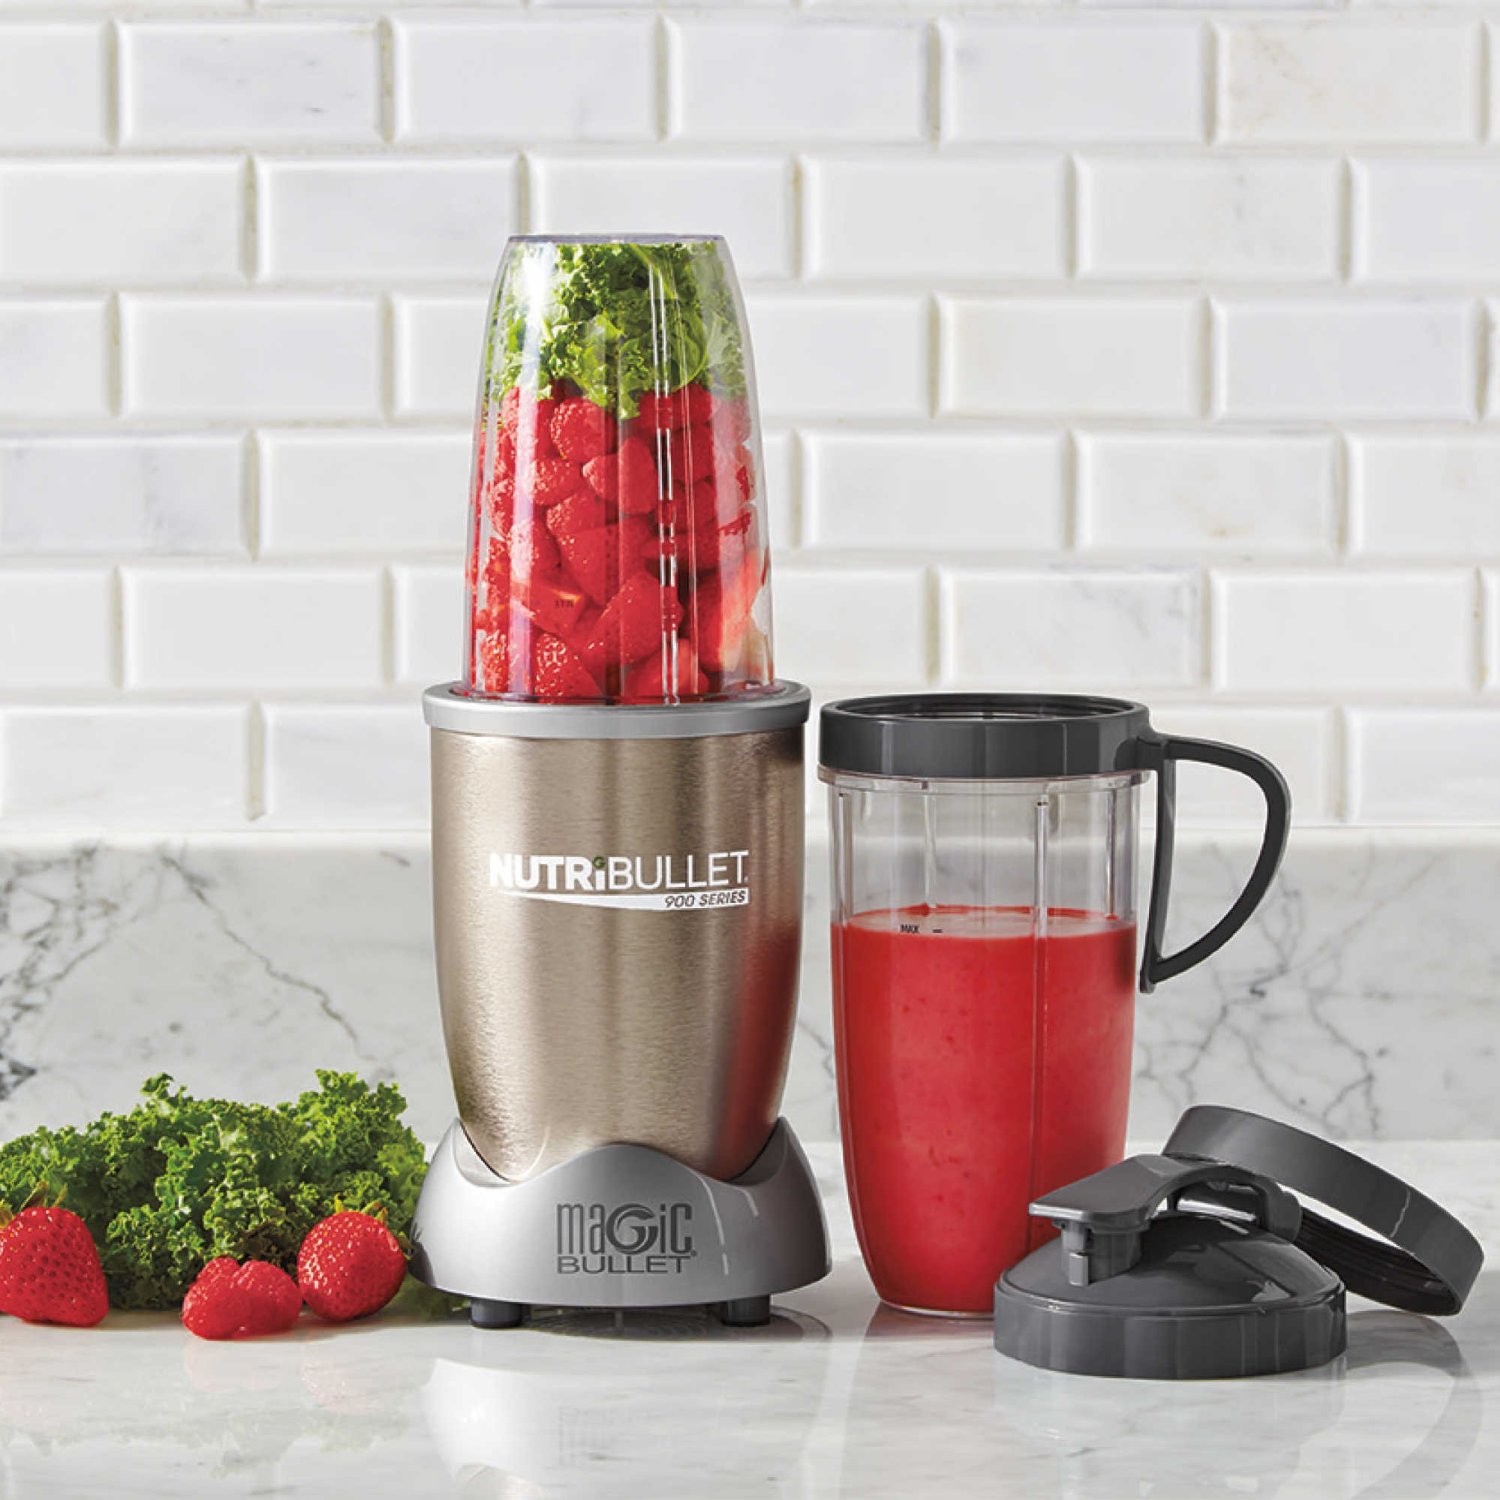 What are the pros and cons of owning a Magic Bullet by NutriBullet?